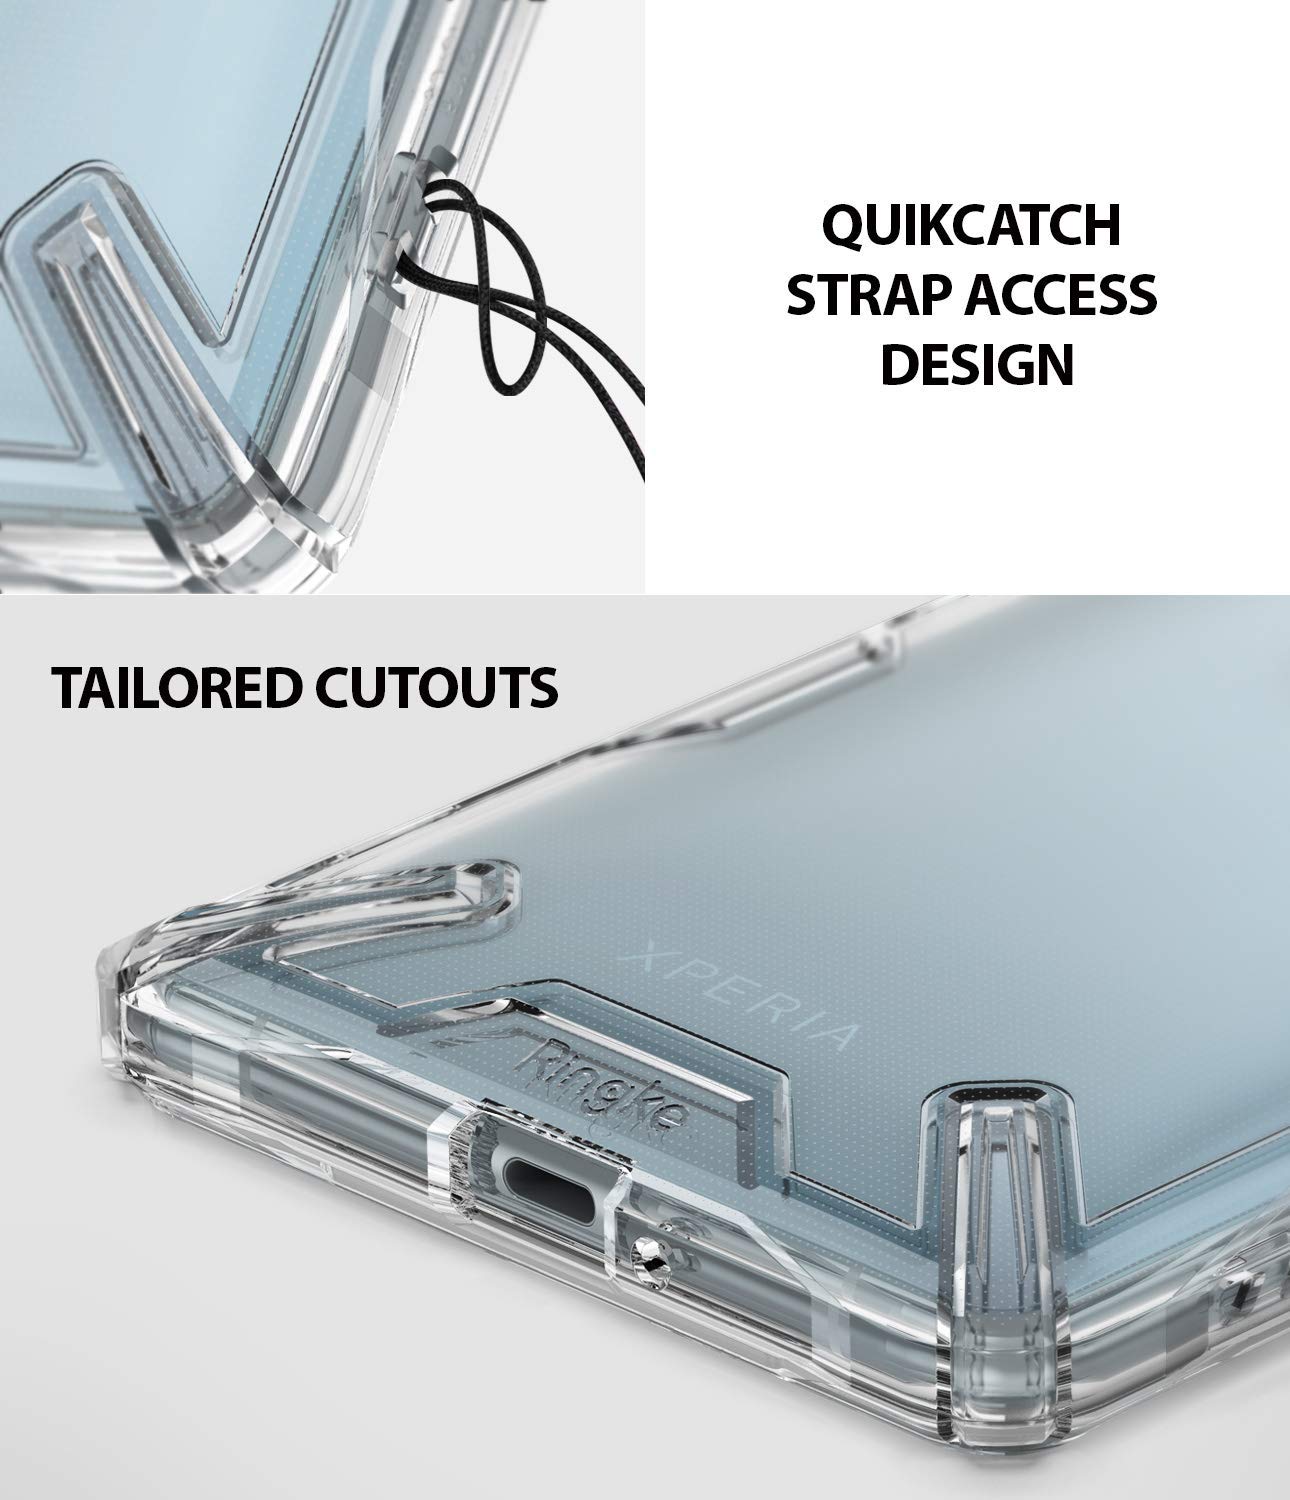 quikcatch strap access hole design with tailored cutouts